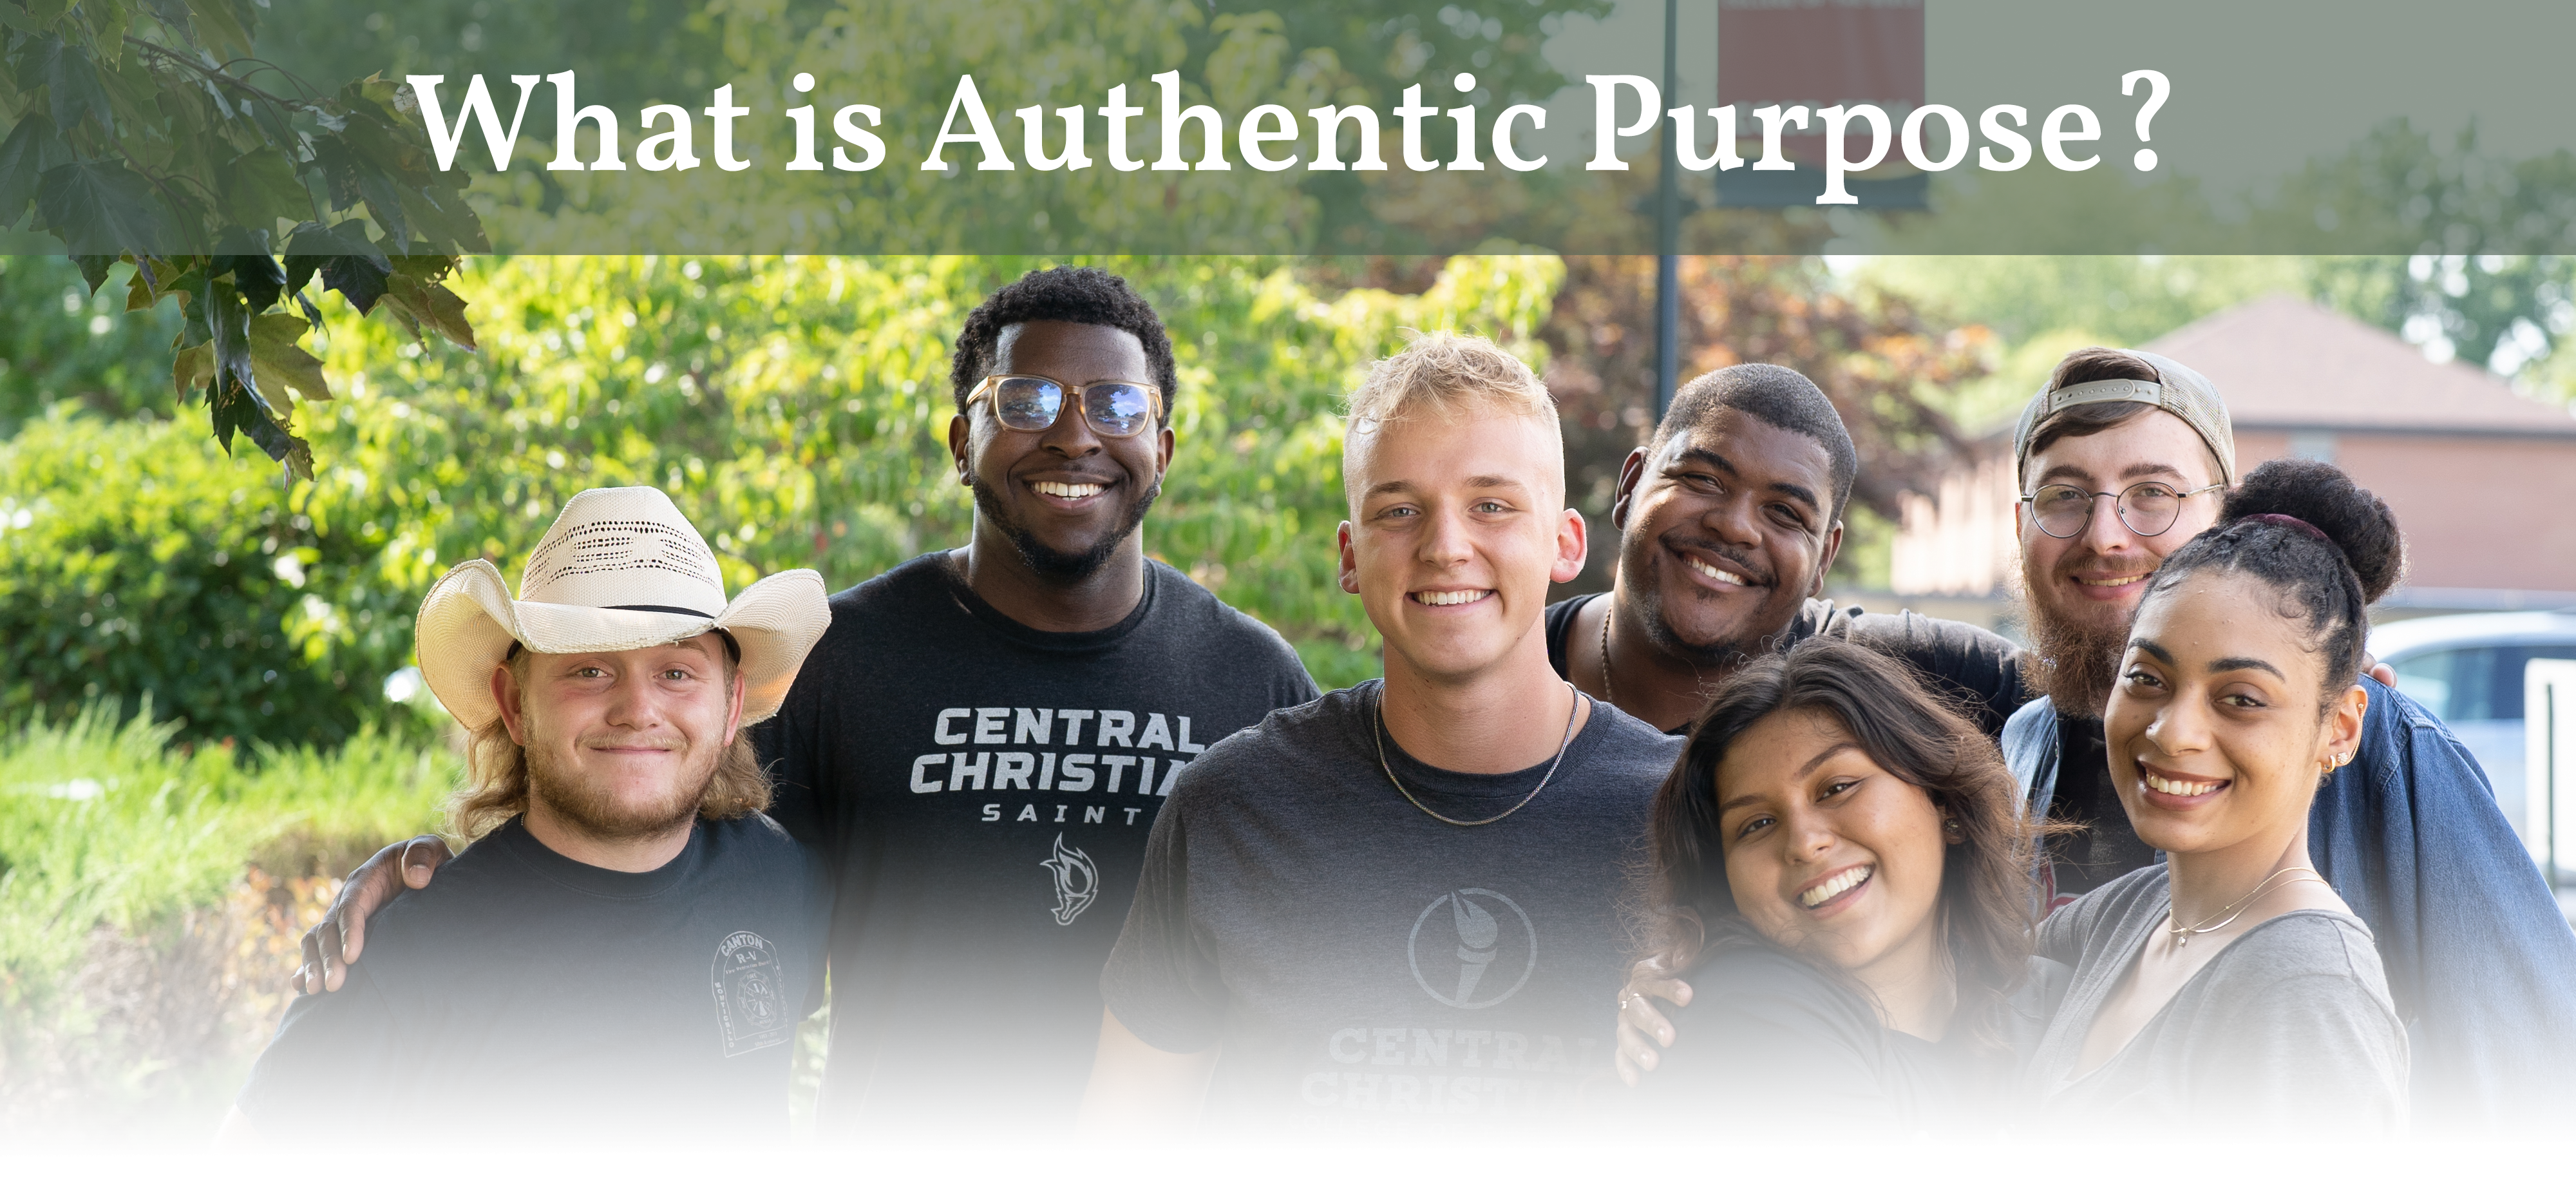 What is Authentic Purpose?